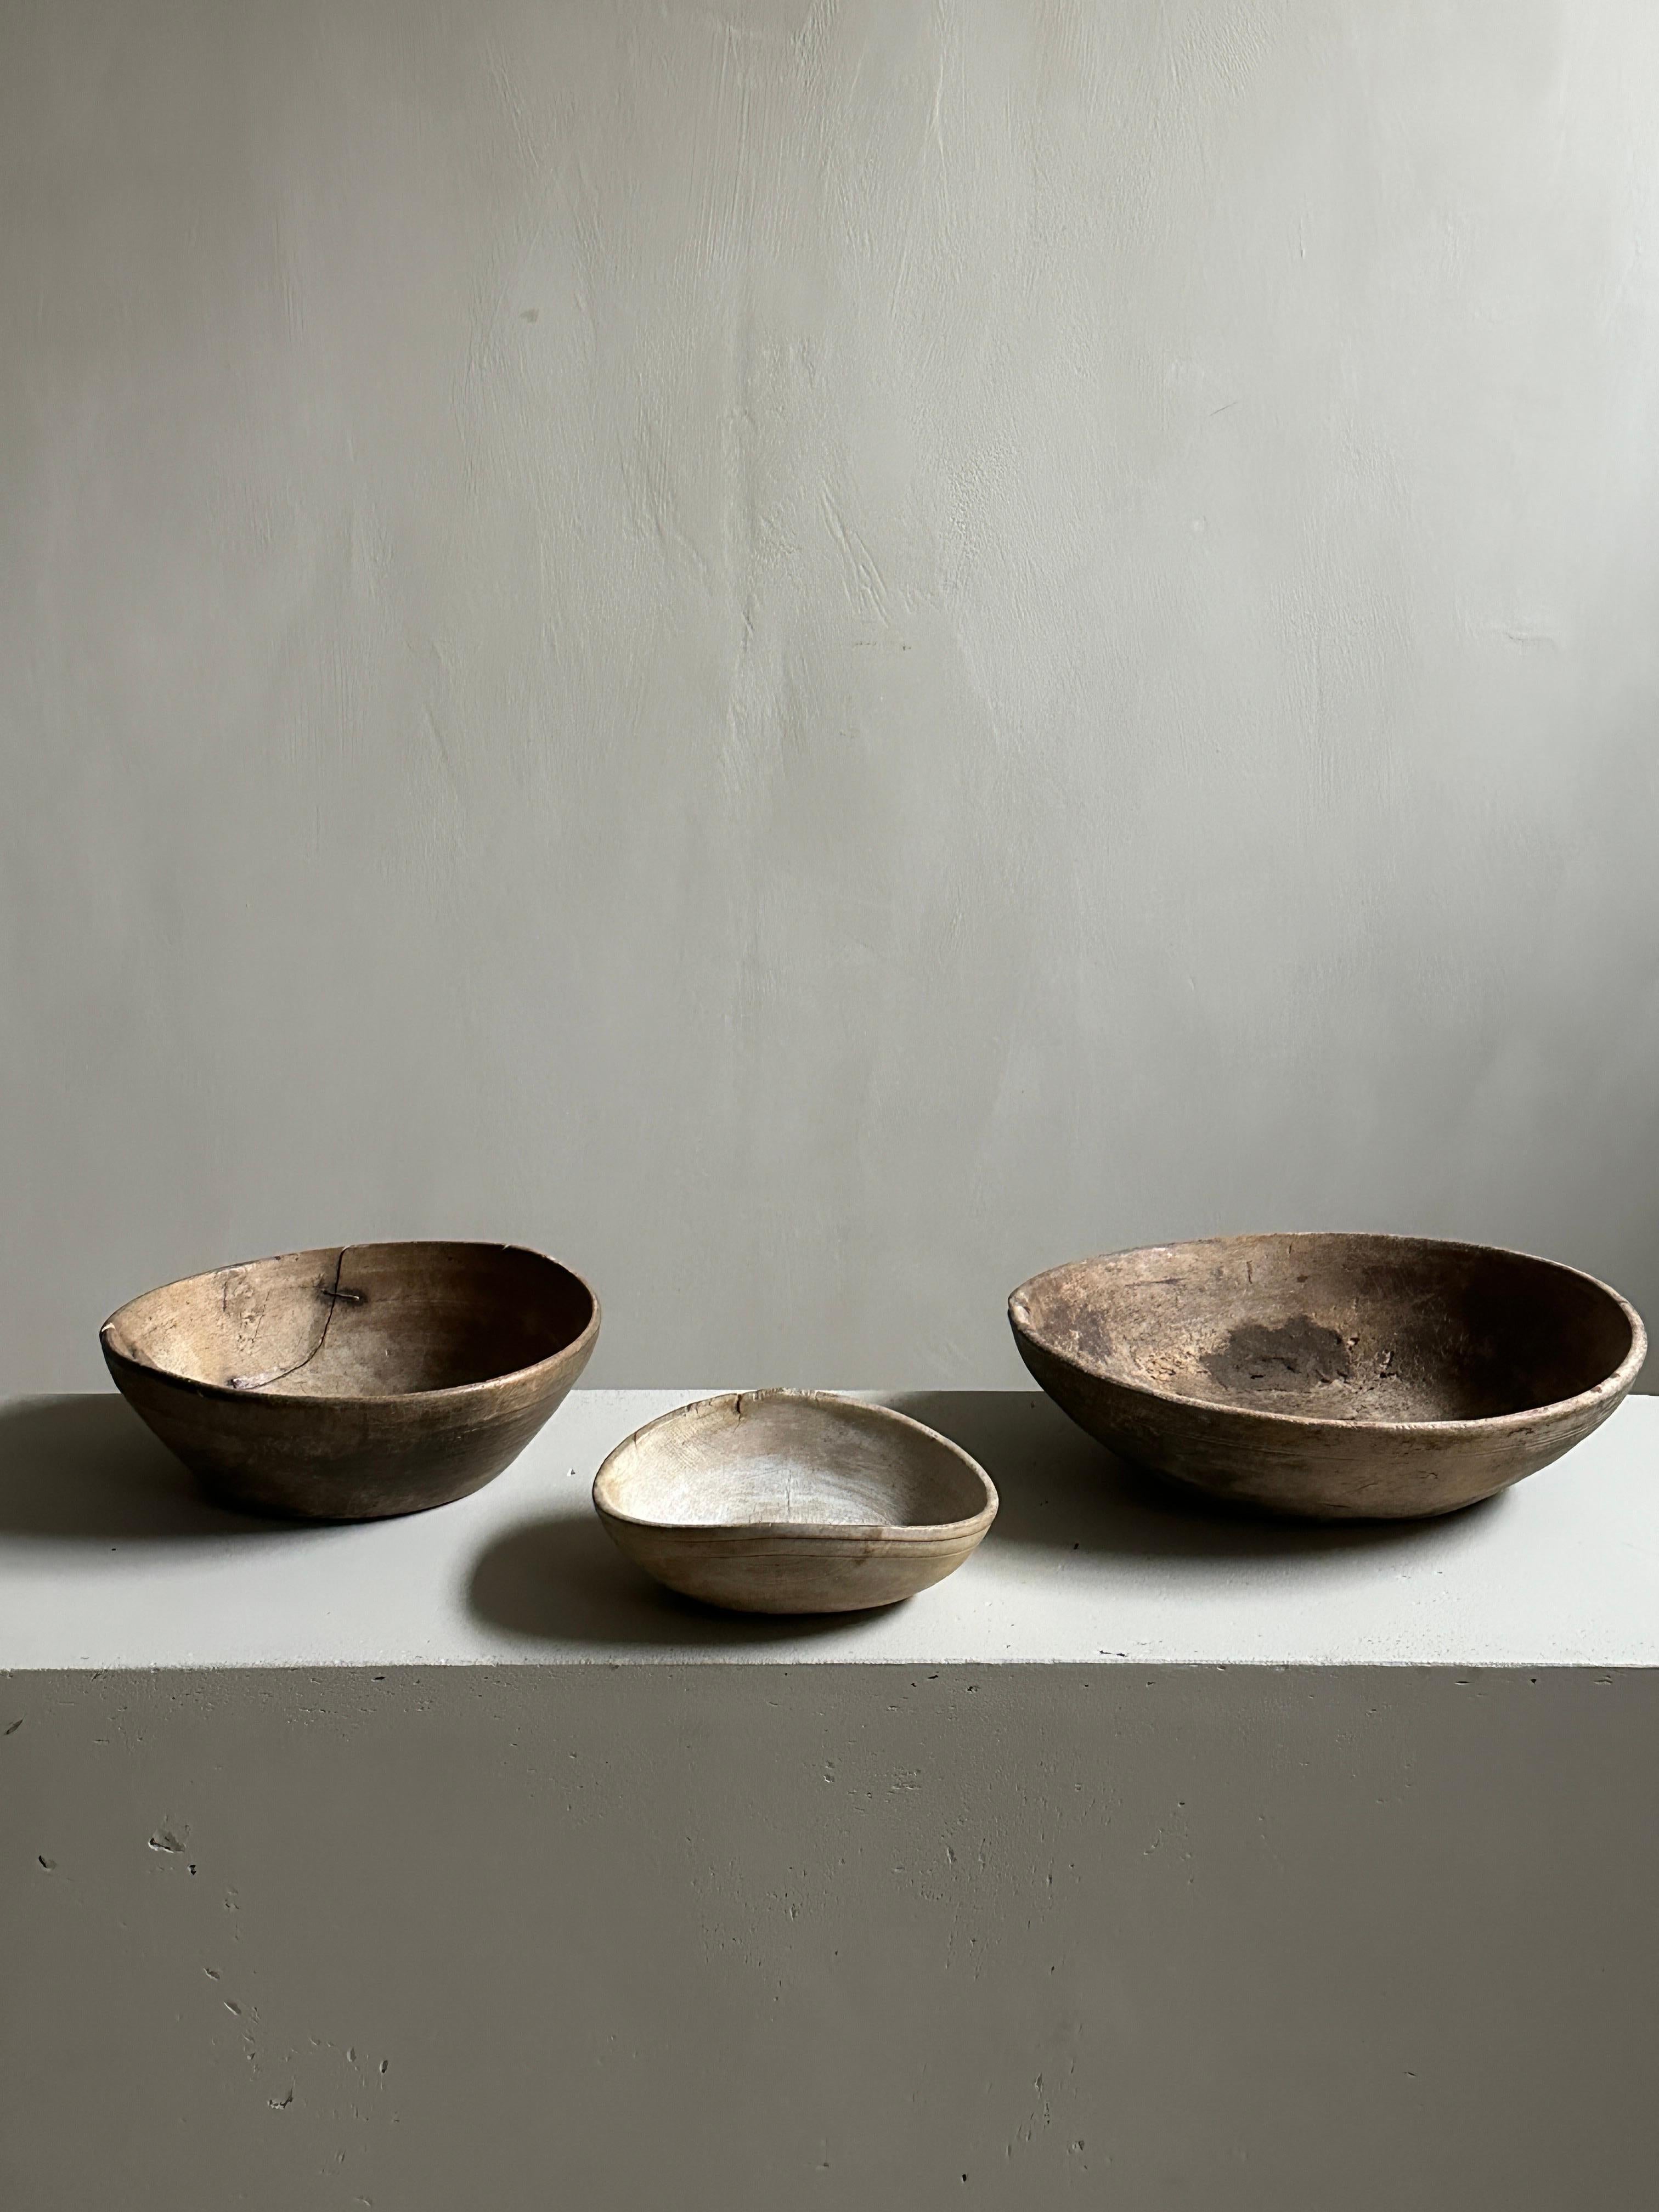 A set of 3 wooden wabi sabi root bowls from Scandinavia, circa 1800s. In good vintage condition showing beautiful patina from age and use. One of the bowls has an old repair. 

Measures: 
Largest: Ø: 33 cm, H: 9 cm
Medium: Ø: 26 cm, H: 8 cm